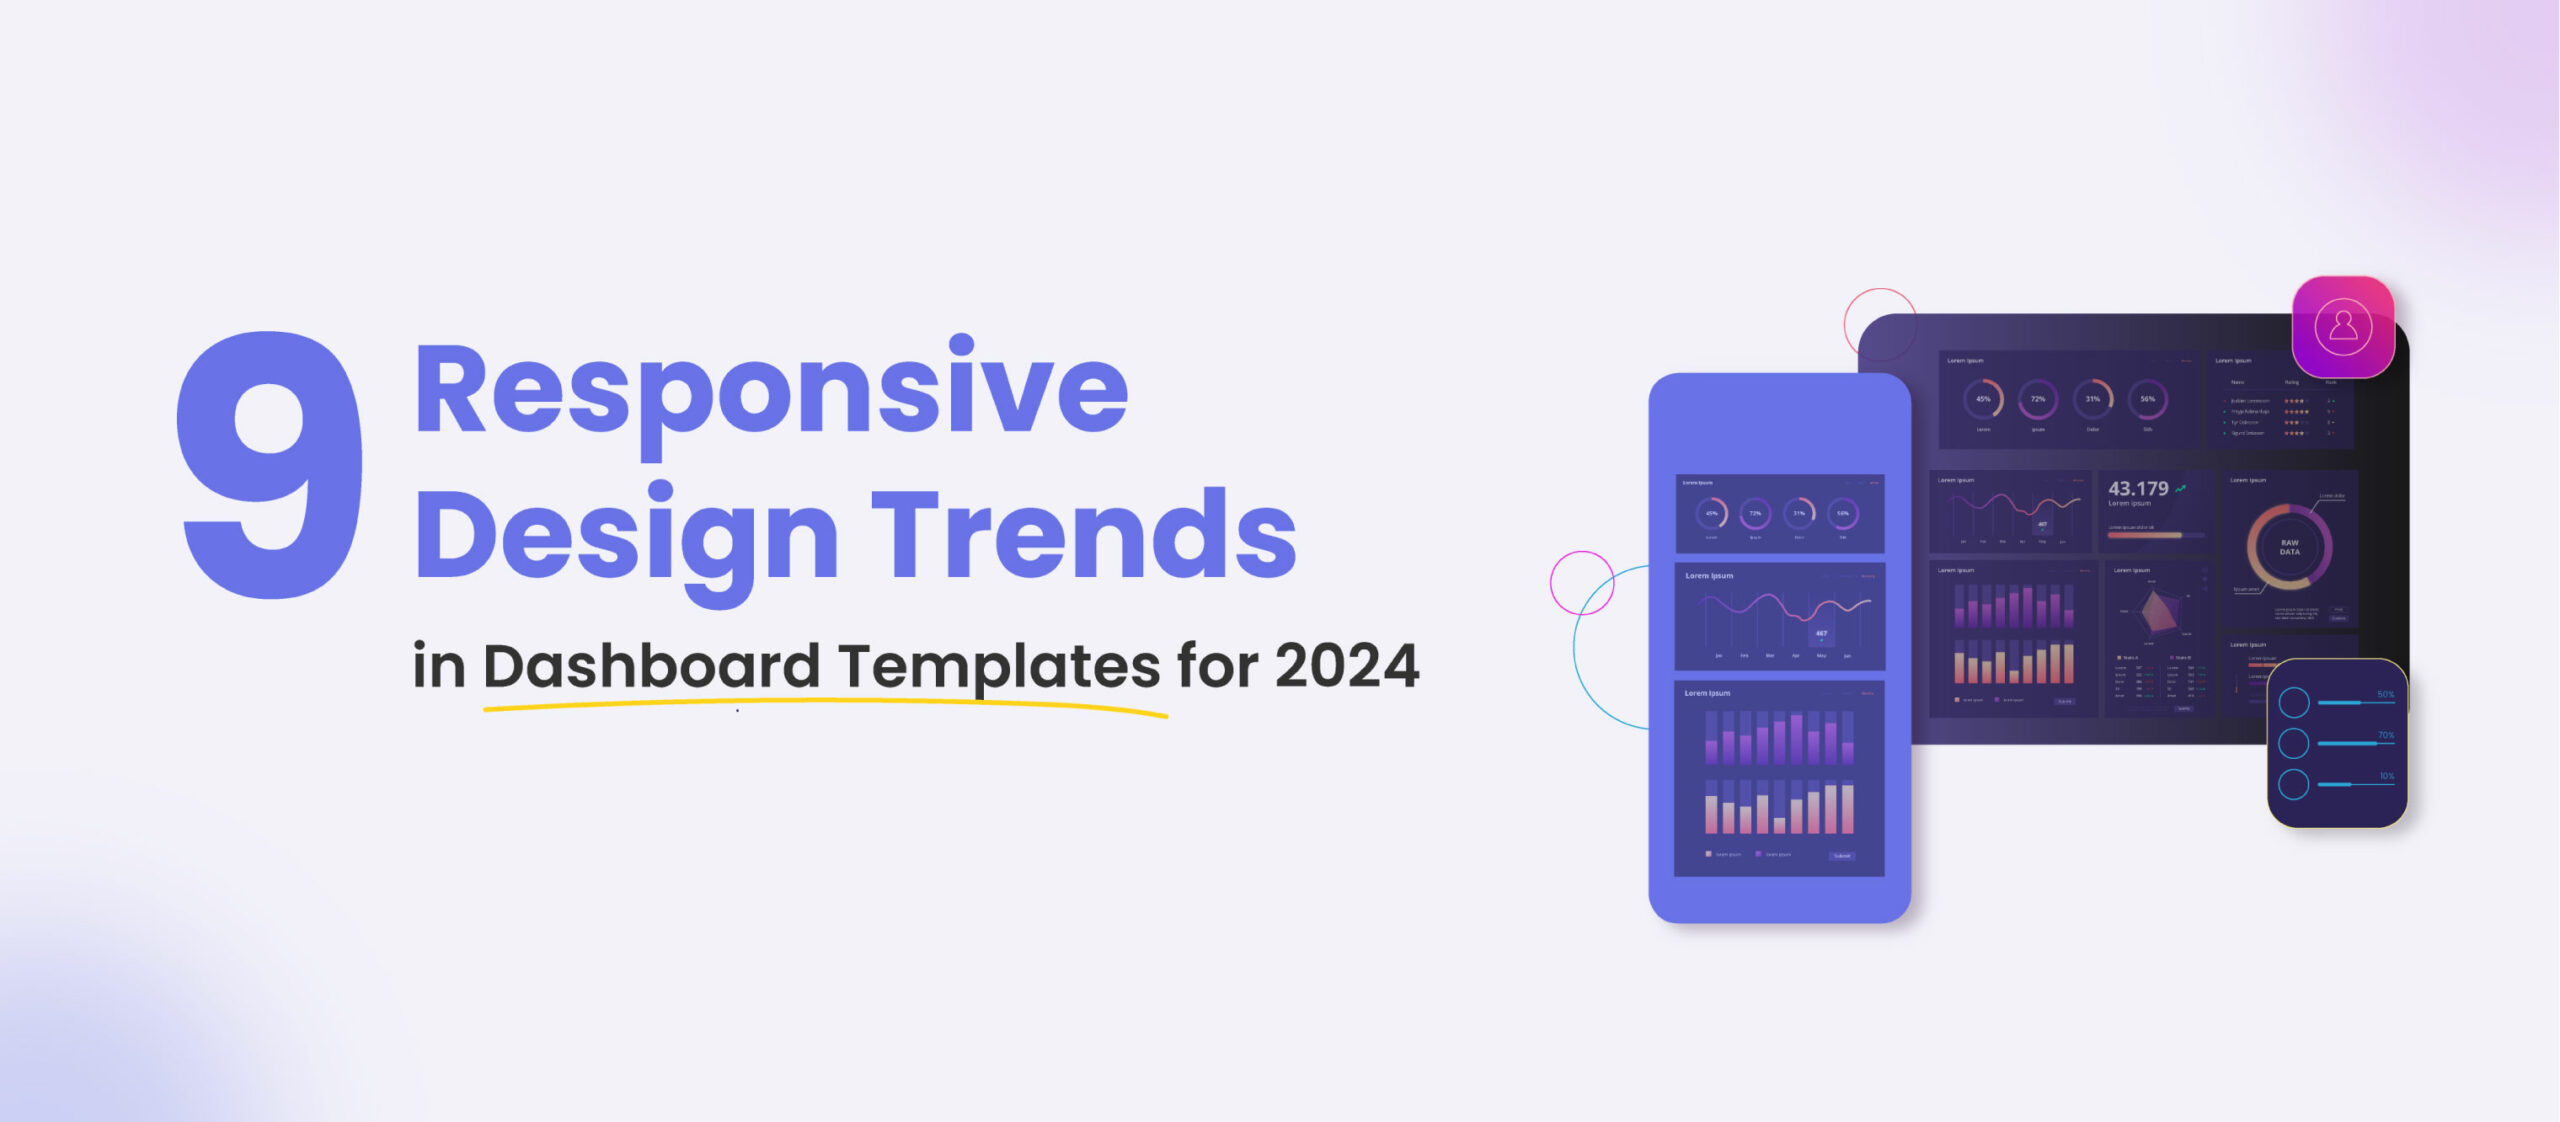  9 Responsive Design Trends in Dashboard Templates for 2024